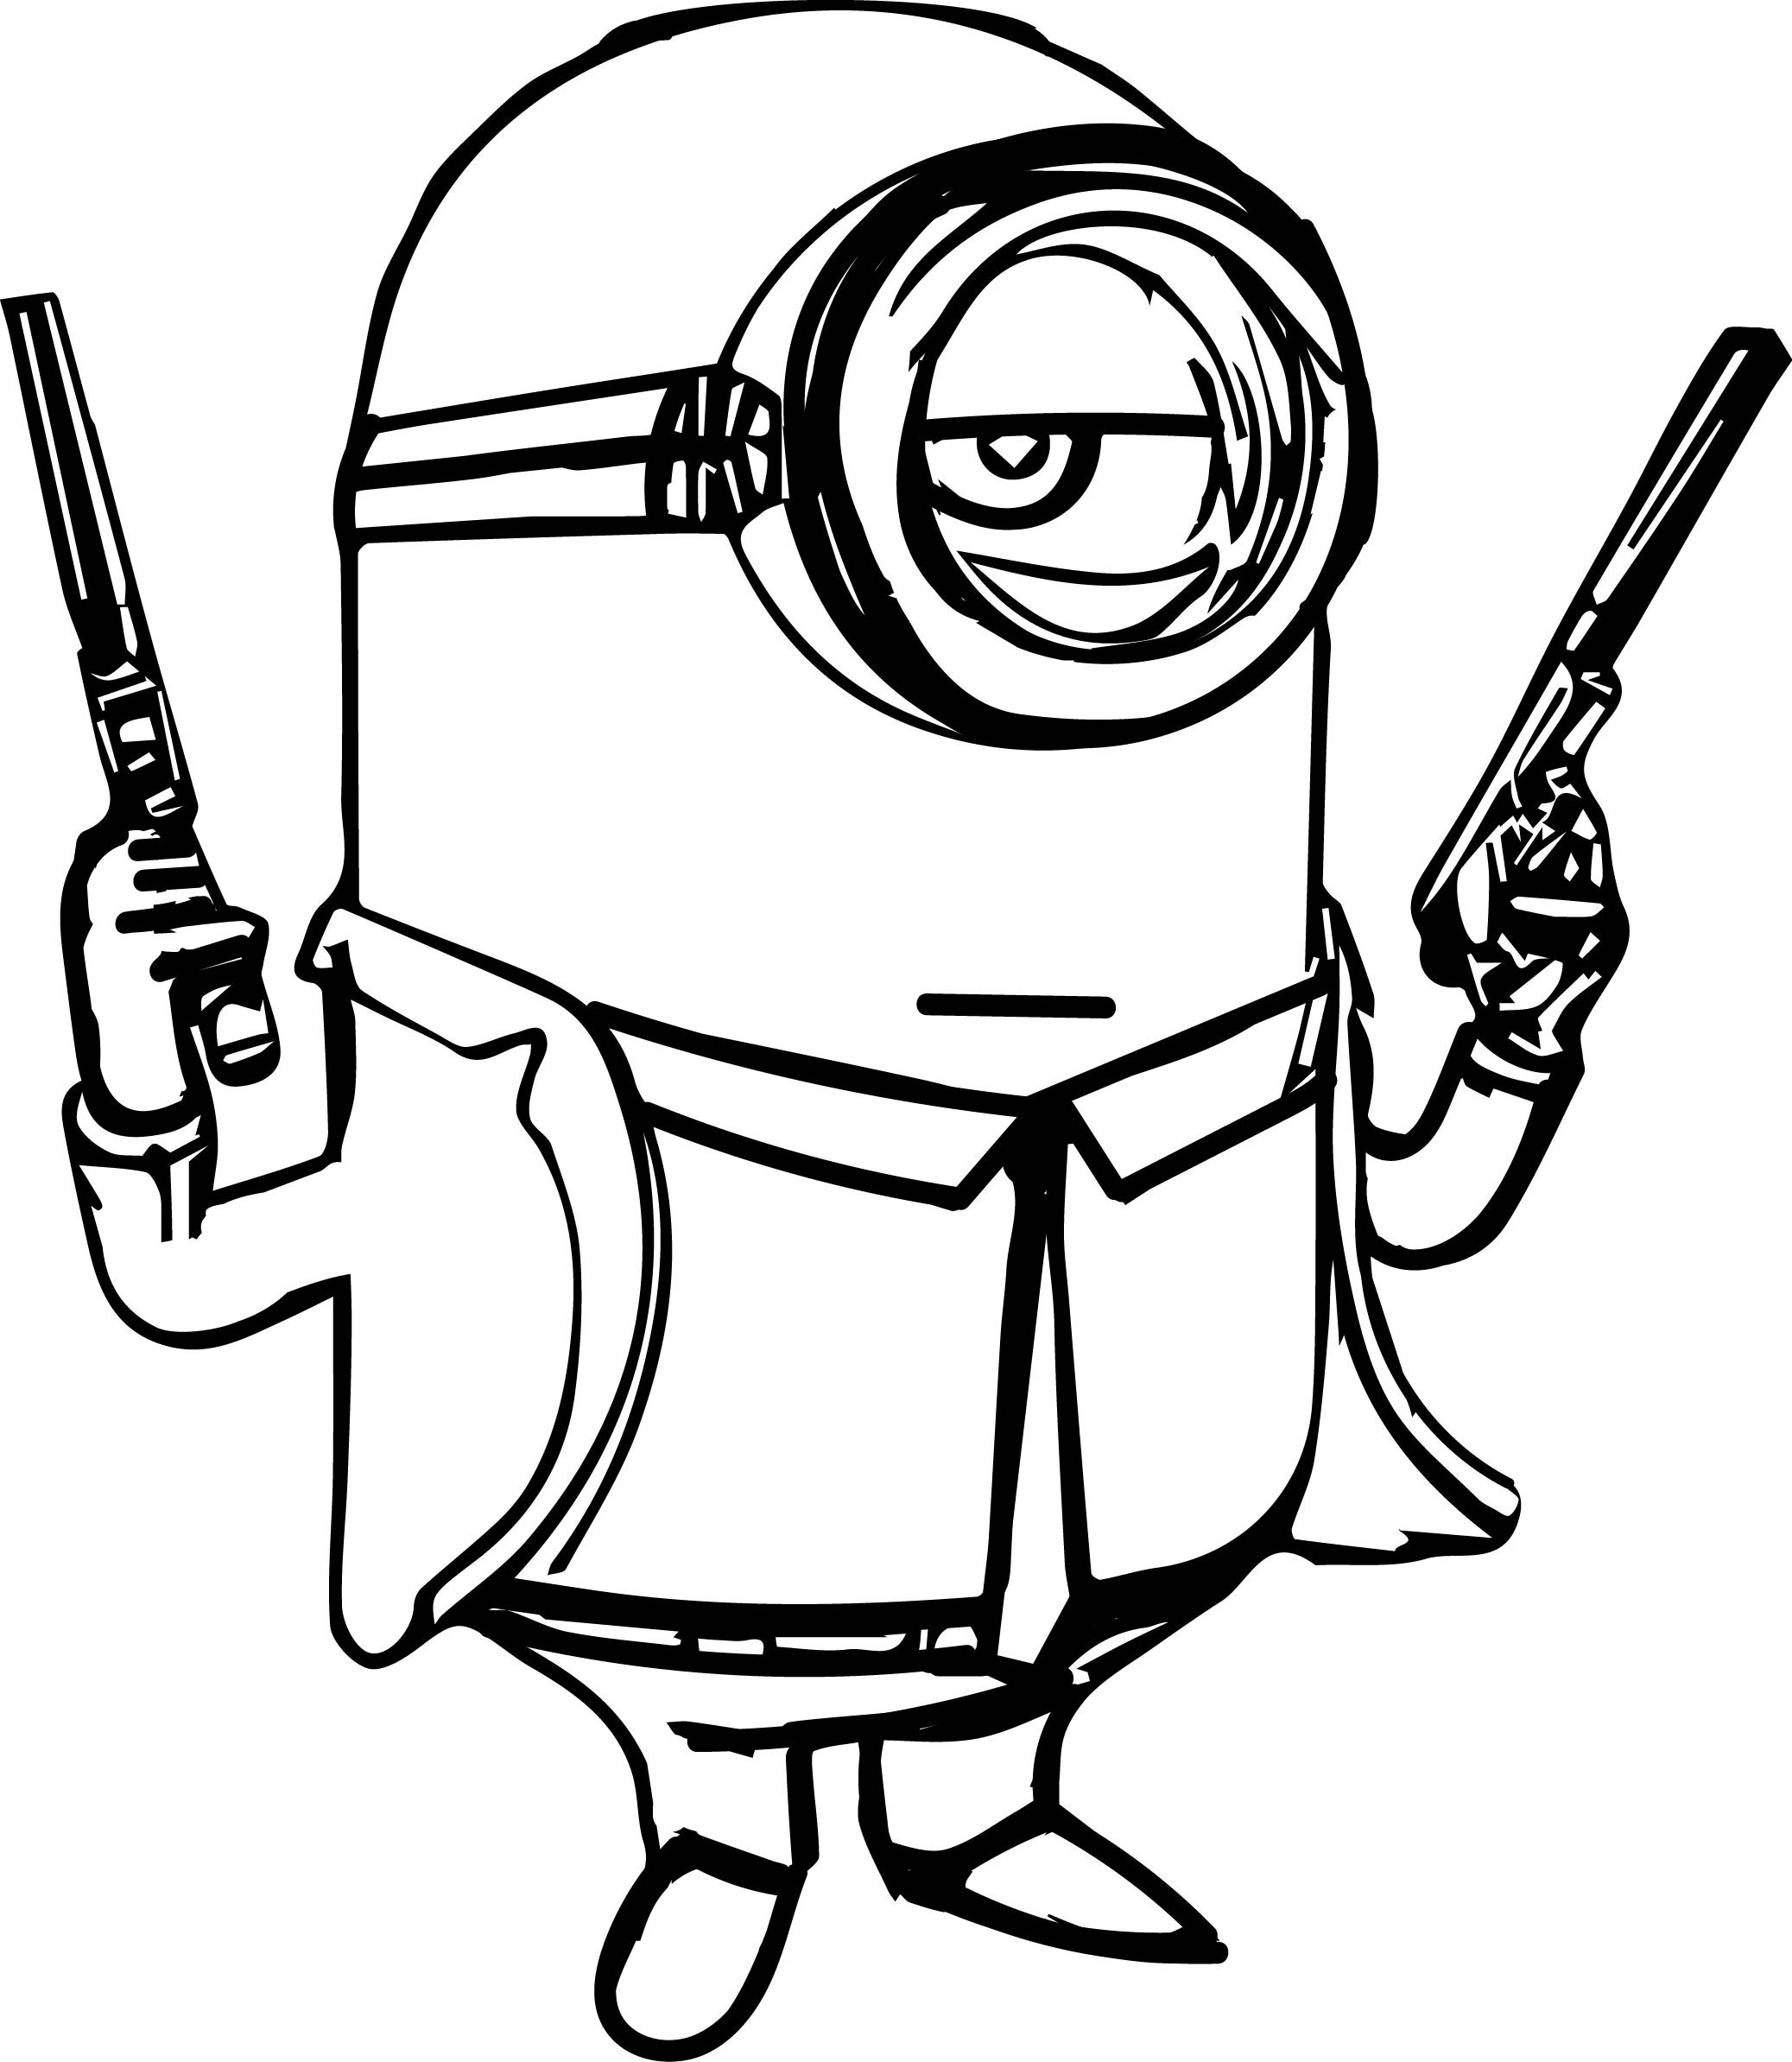 nerf gun coloring pages at getcoloringscom free